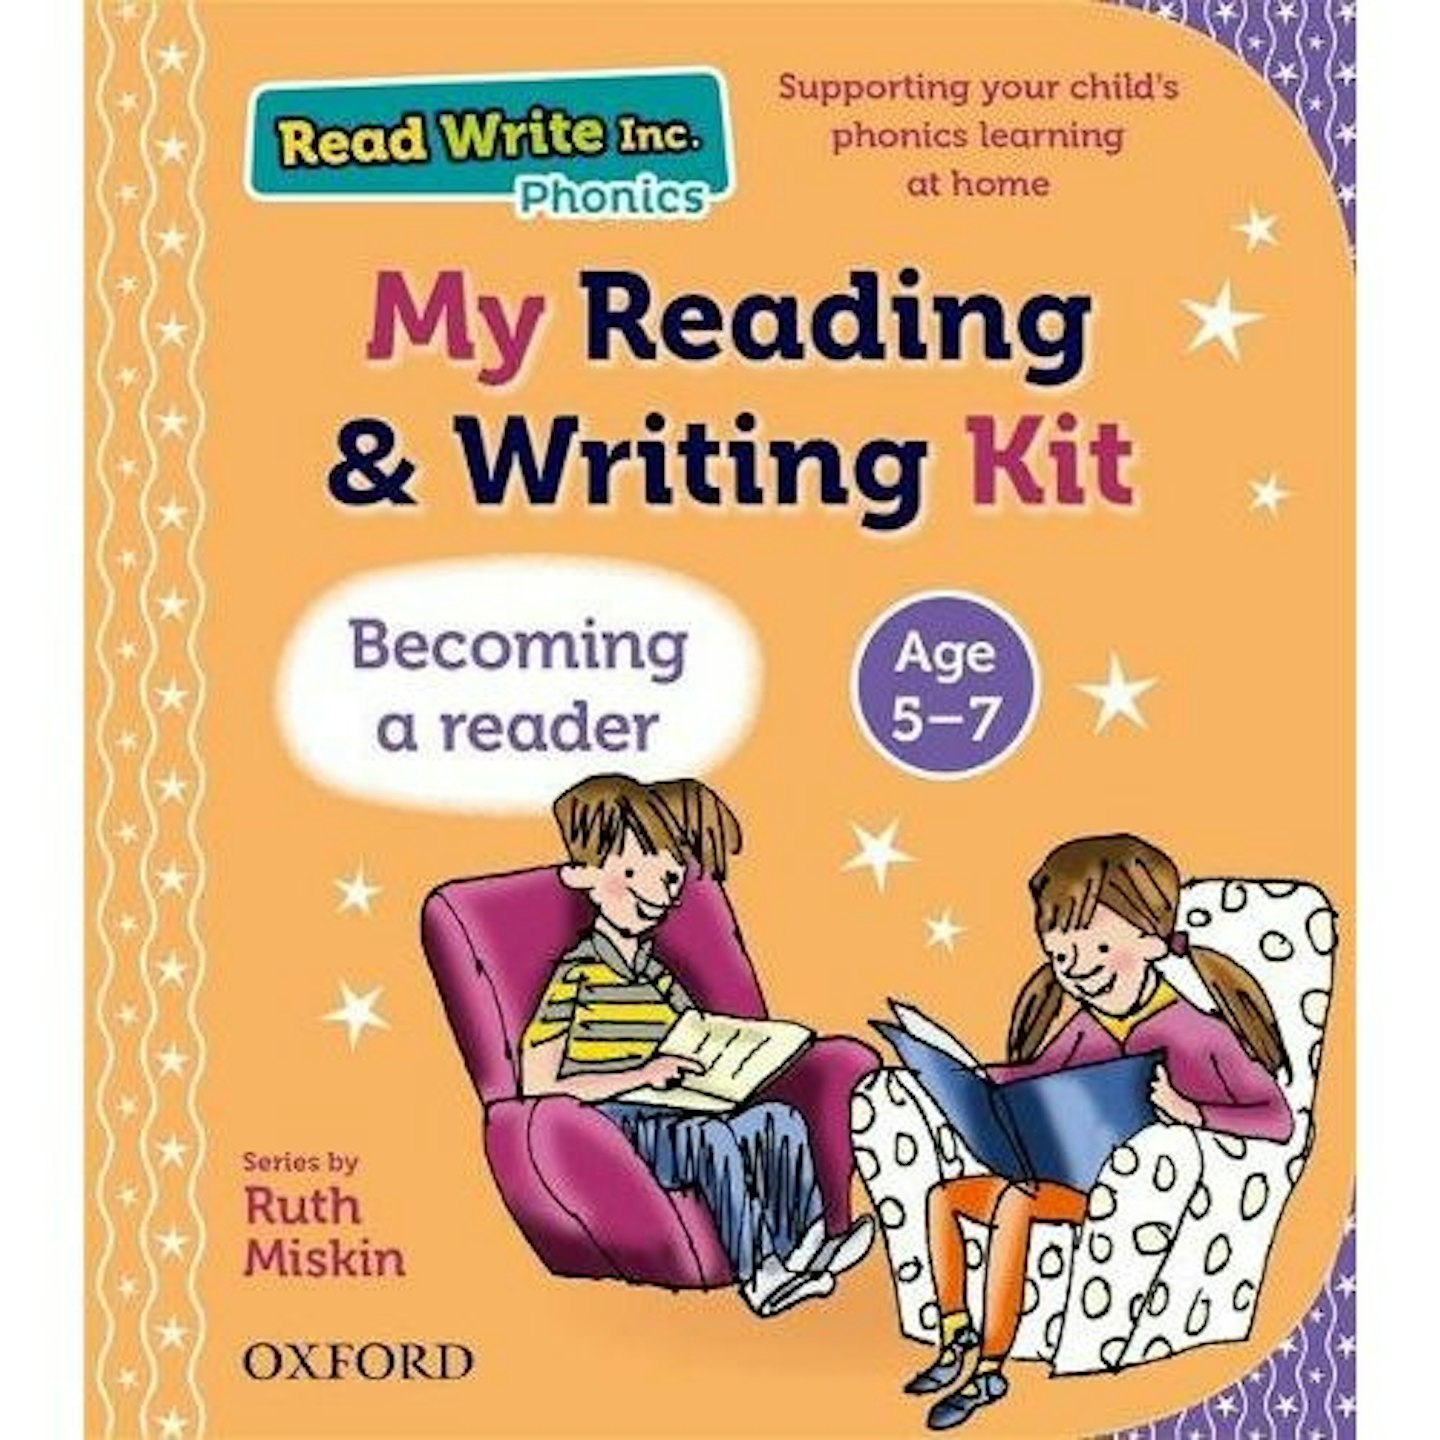 https://images.bauerhosting.com/affiliates/sites/12/motherandbaby/2022/06/Read-Write-Inc.-My-Reading-and-Writing-Kit-Becoming-a-reader-Read-Write-Inc..jpg?auto=format&w=1440&q=80